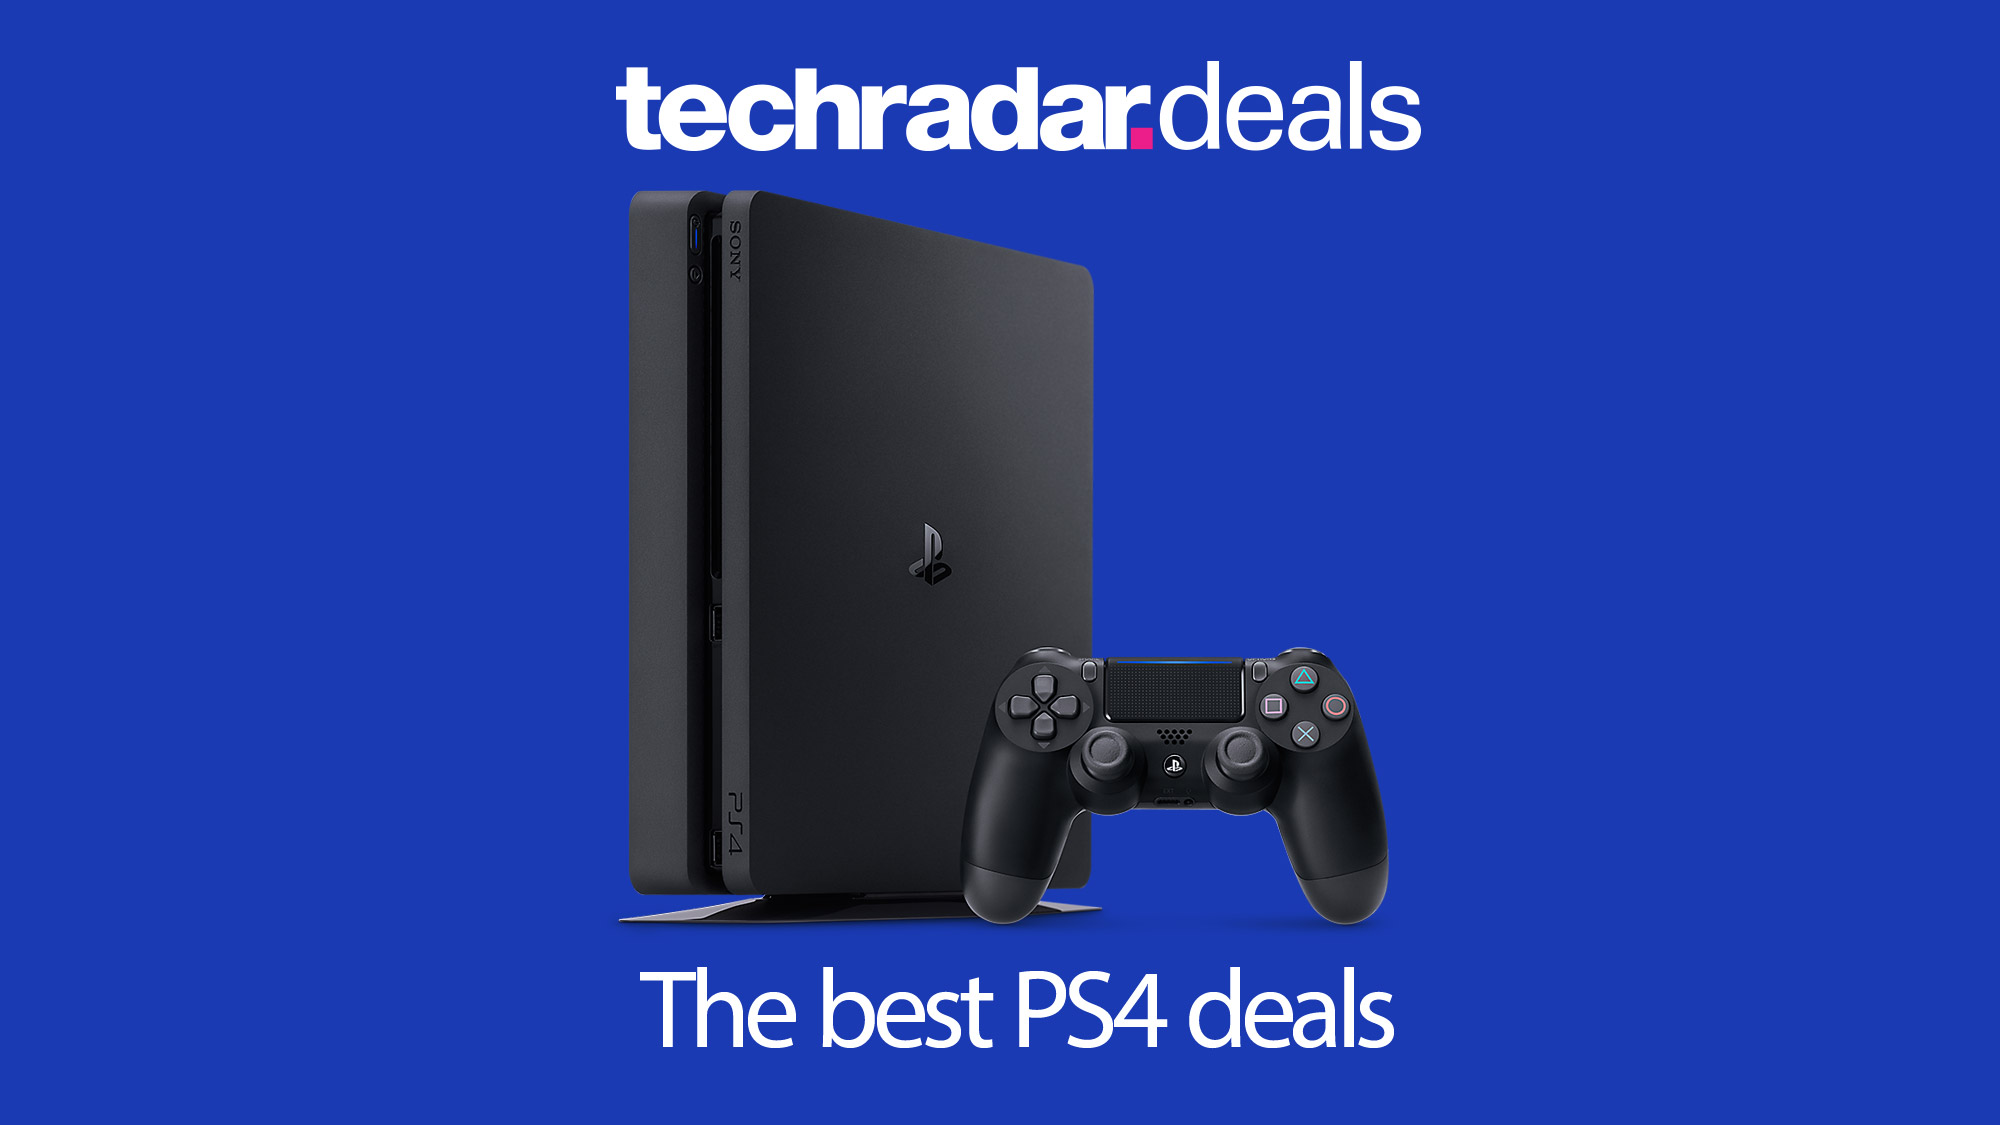 cheapest place to buy a playstation 4